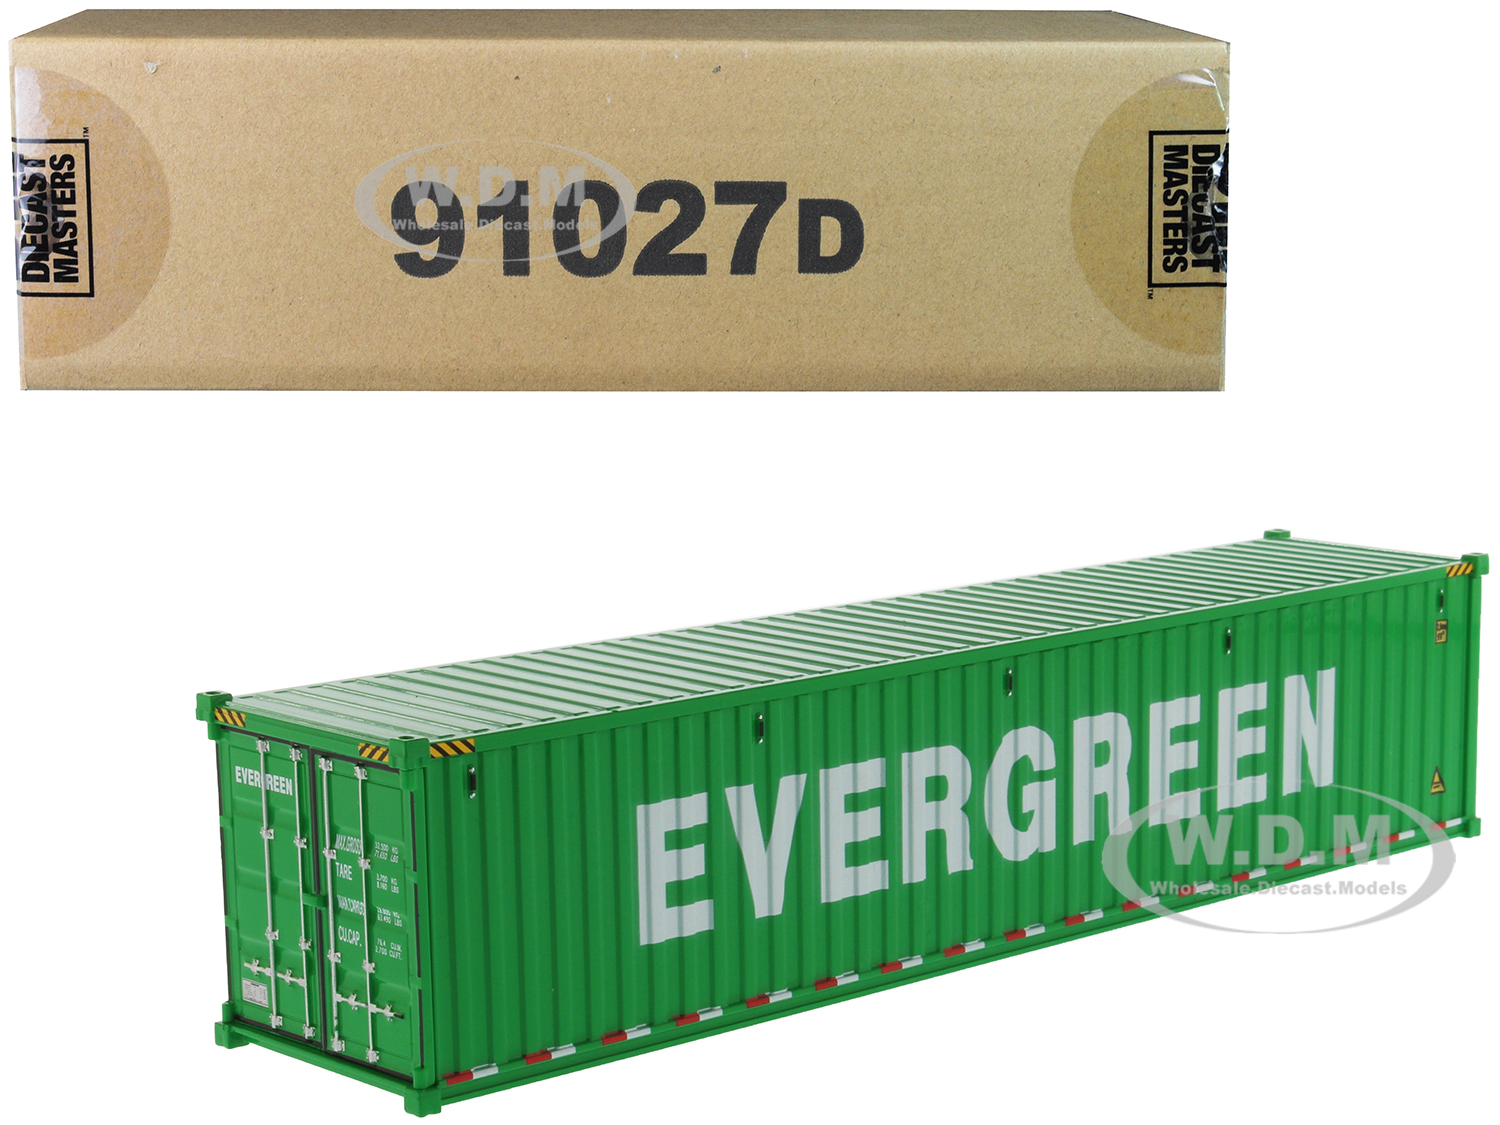 40 Dry Goods Sea Container "EverGreen" Green "Transport Series" 1/50 Model by Diecast Masters